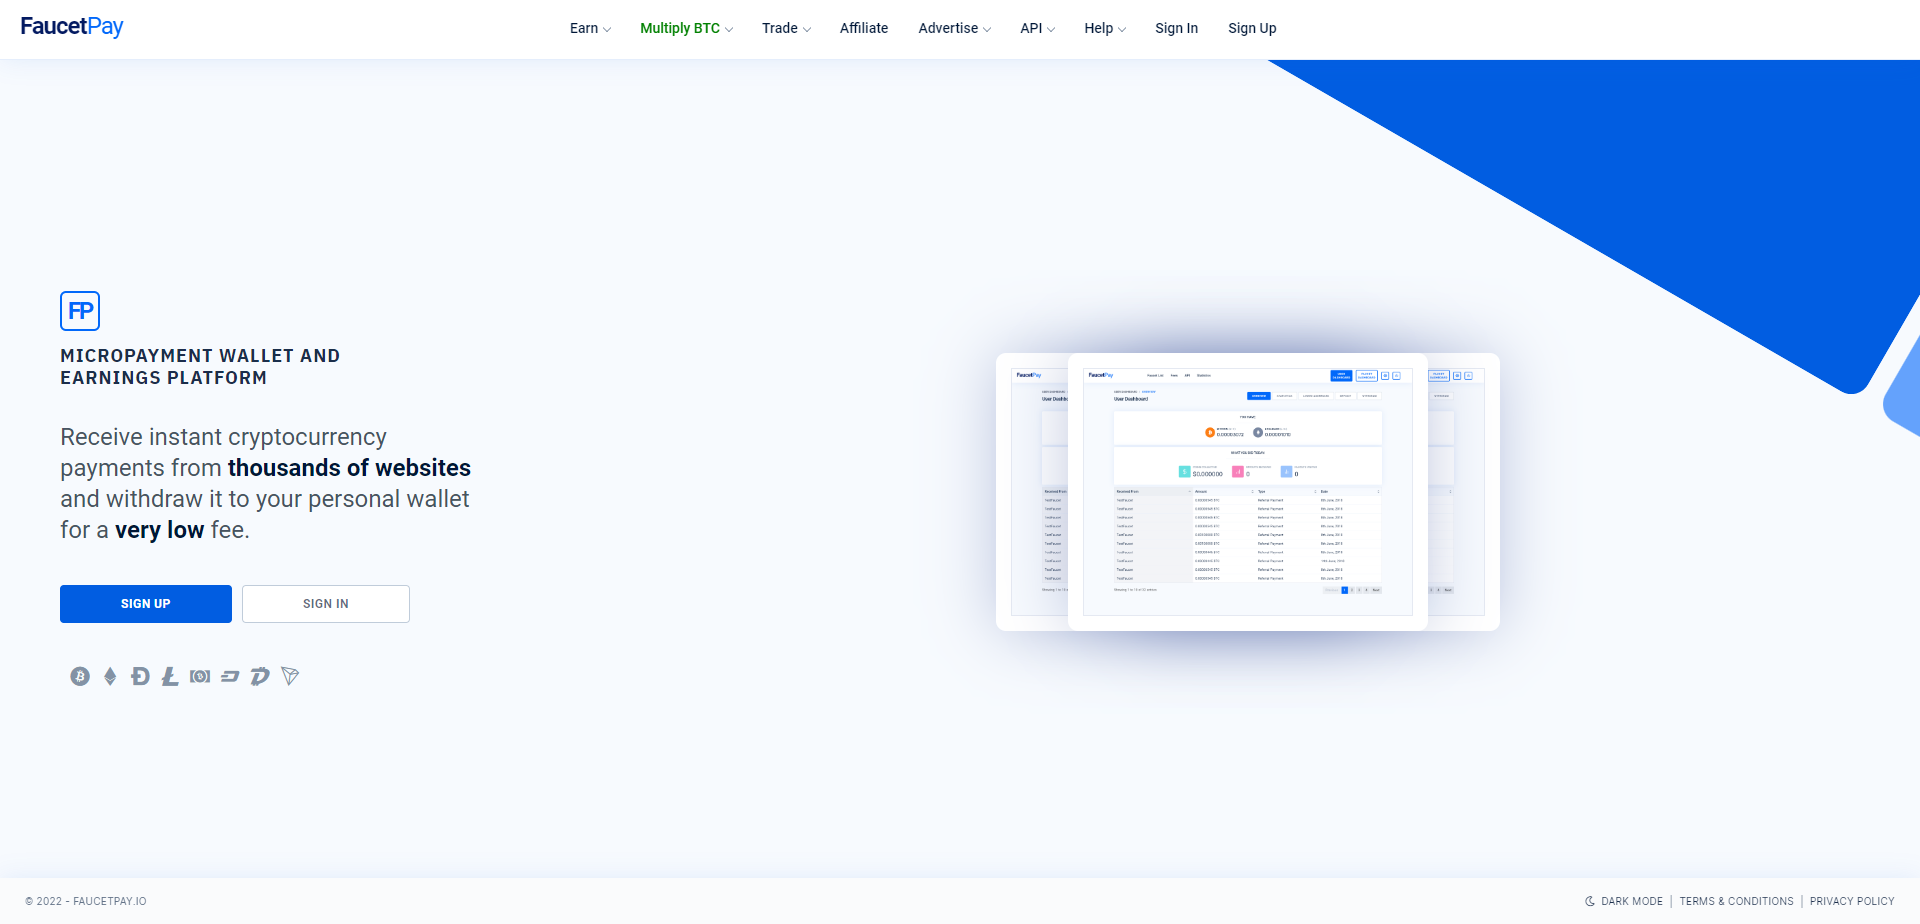 Landing Page for Faucetpay